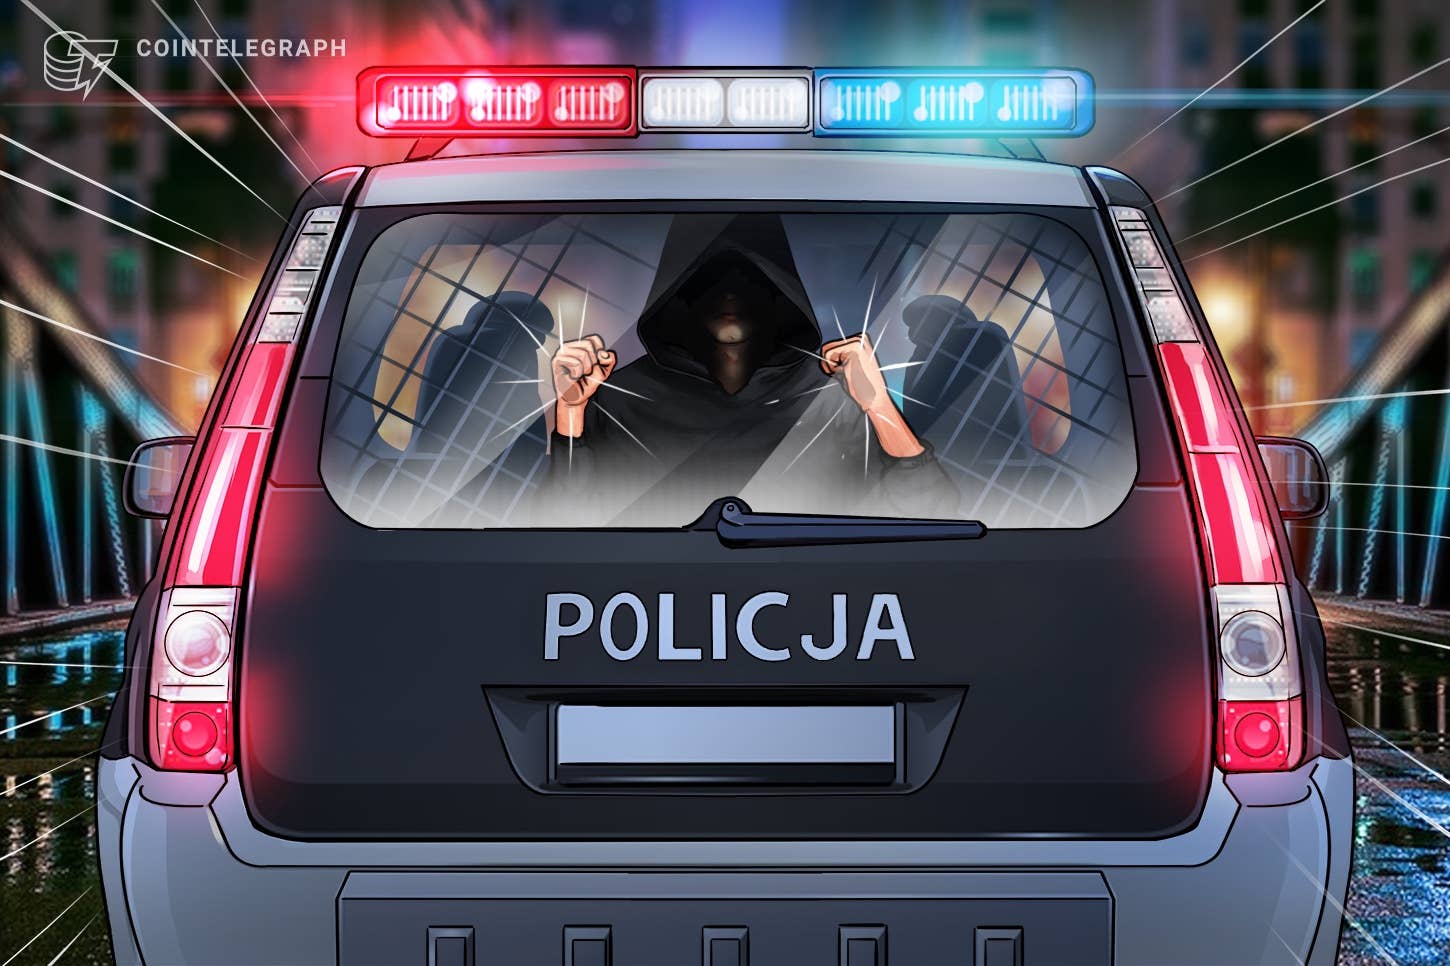 Former-chief-of-russia’s-wex-crypto-exchange-arrested-in-poland